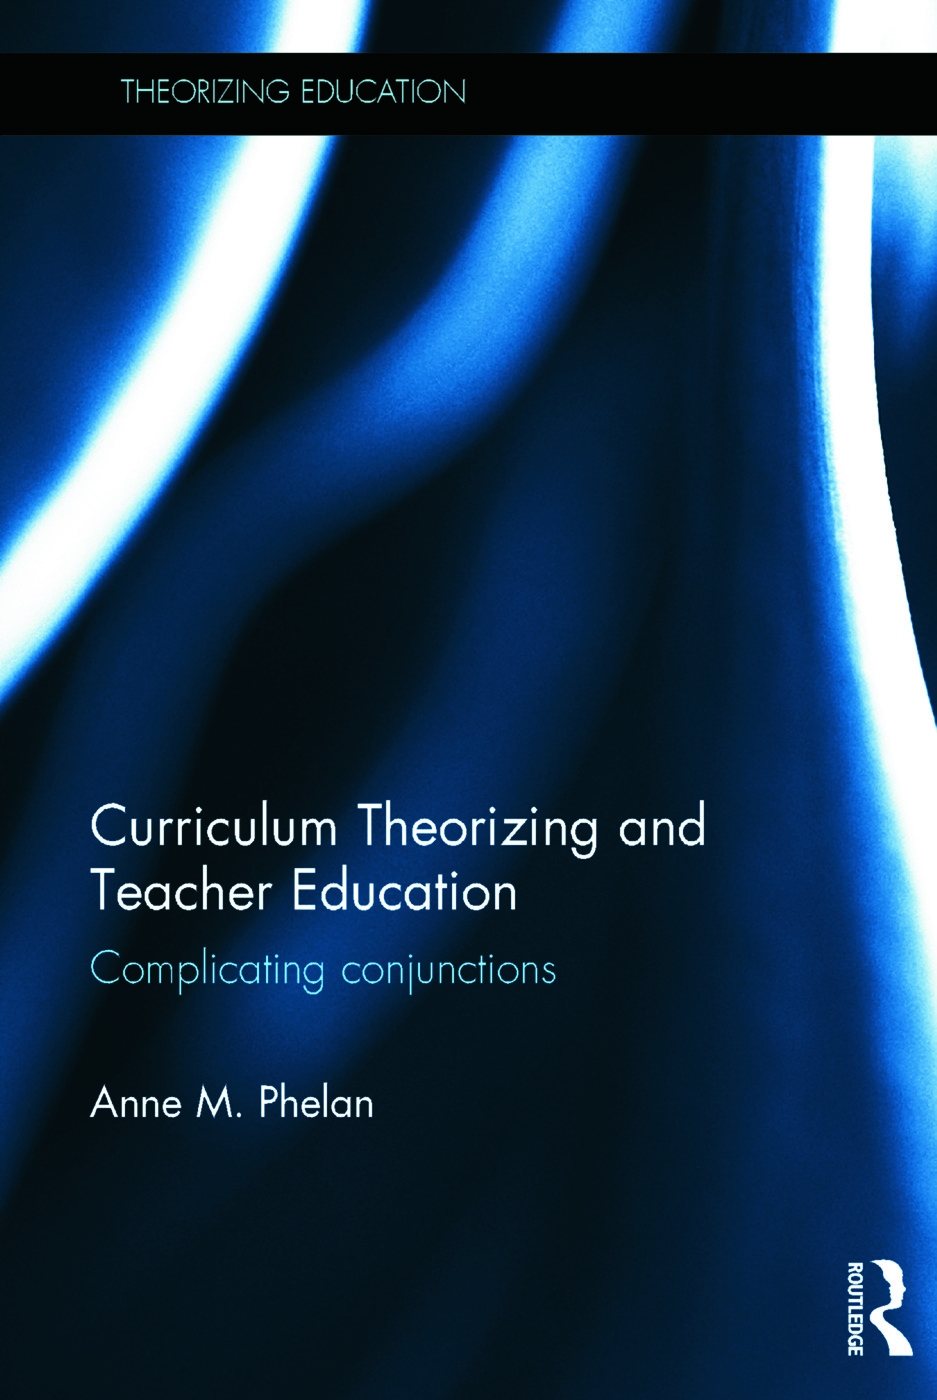 Curriculum Theorizing and Teacher Education: Complicating Conjunctions